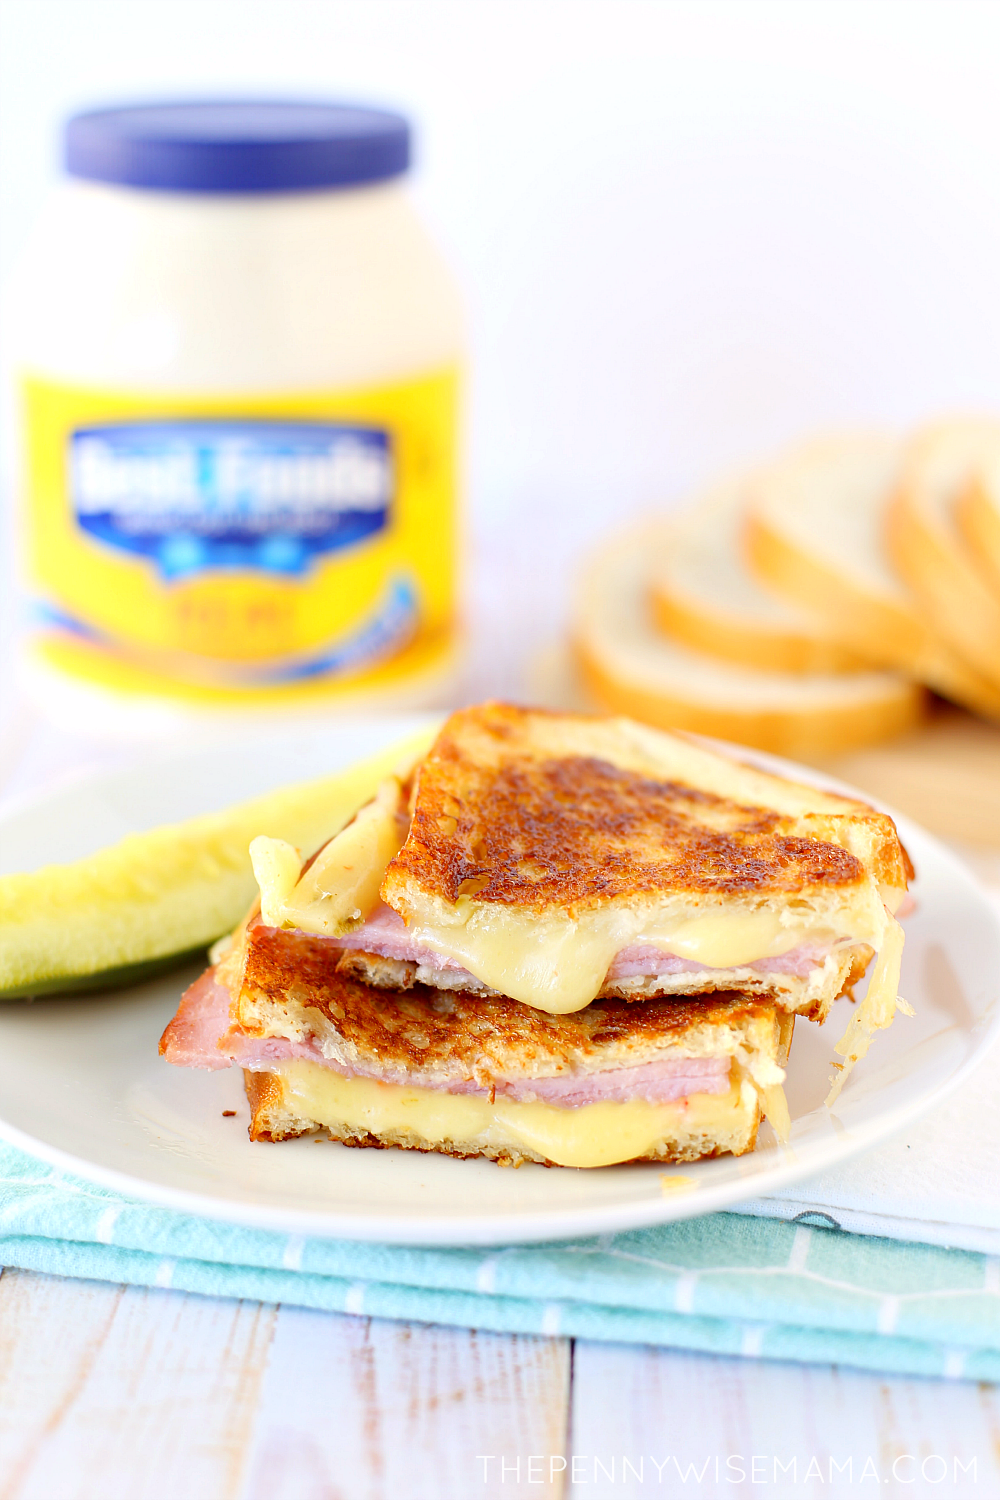 Grilled Ham and Pepper Jack Cheese Sandwich Recipe - Amazing grilled cheese with mayo!